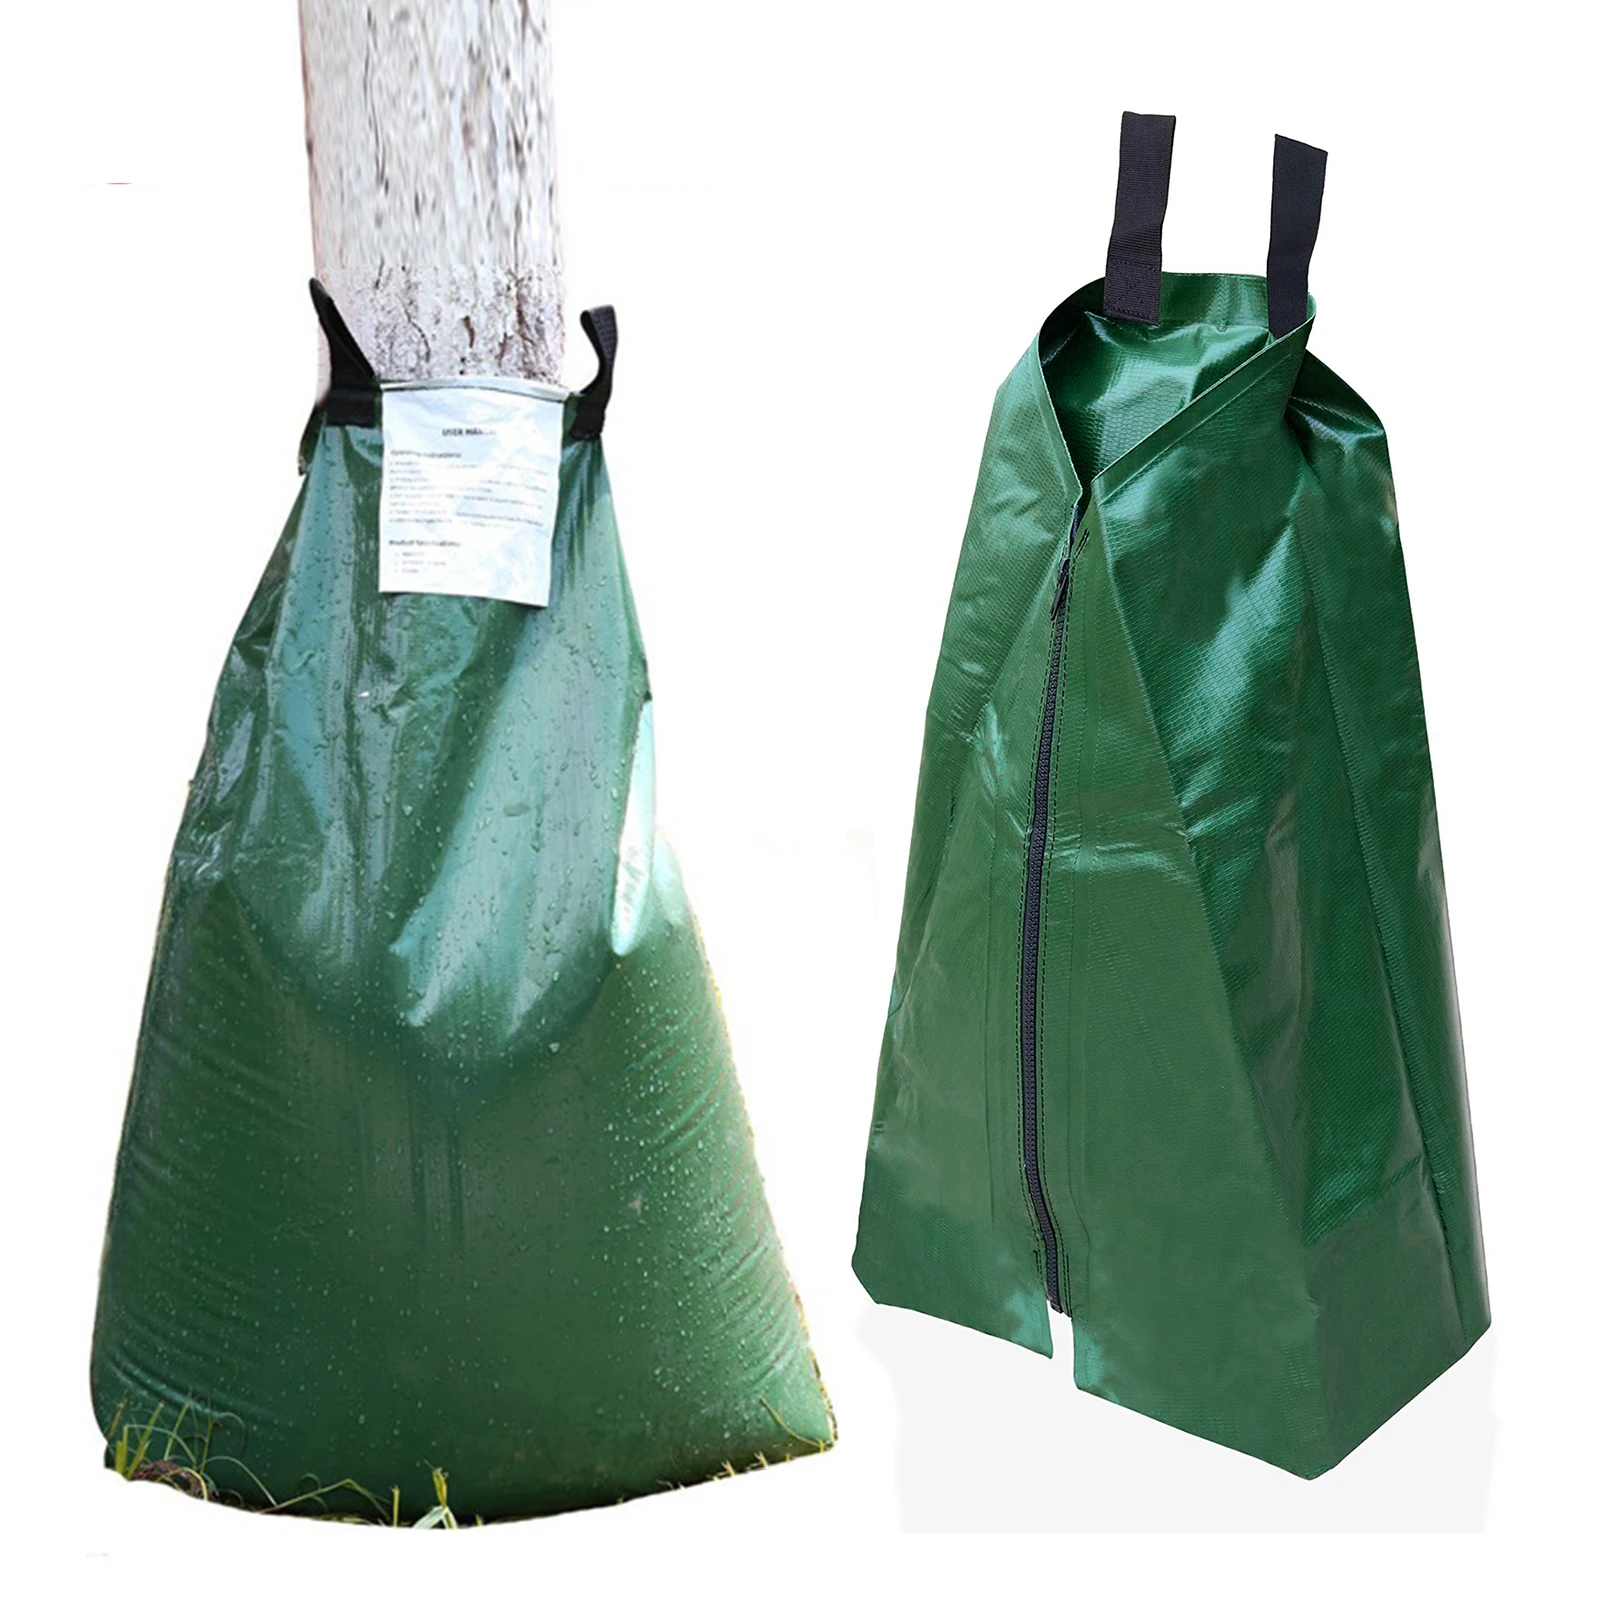 

Slow Release Watering Bags For Trees 20 Gallon Drip Irrigation Water Pouches Tree Irrigation Bag Made Of Durable PVC Material